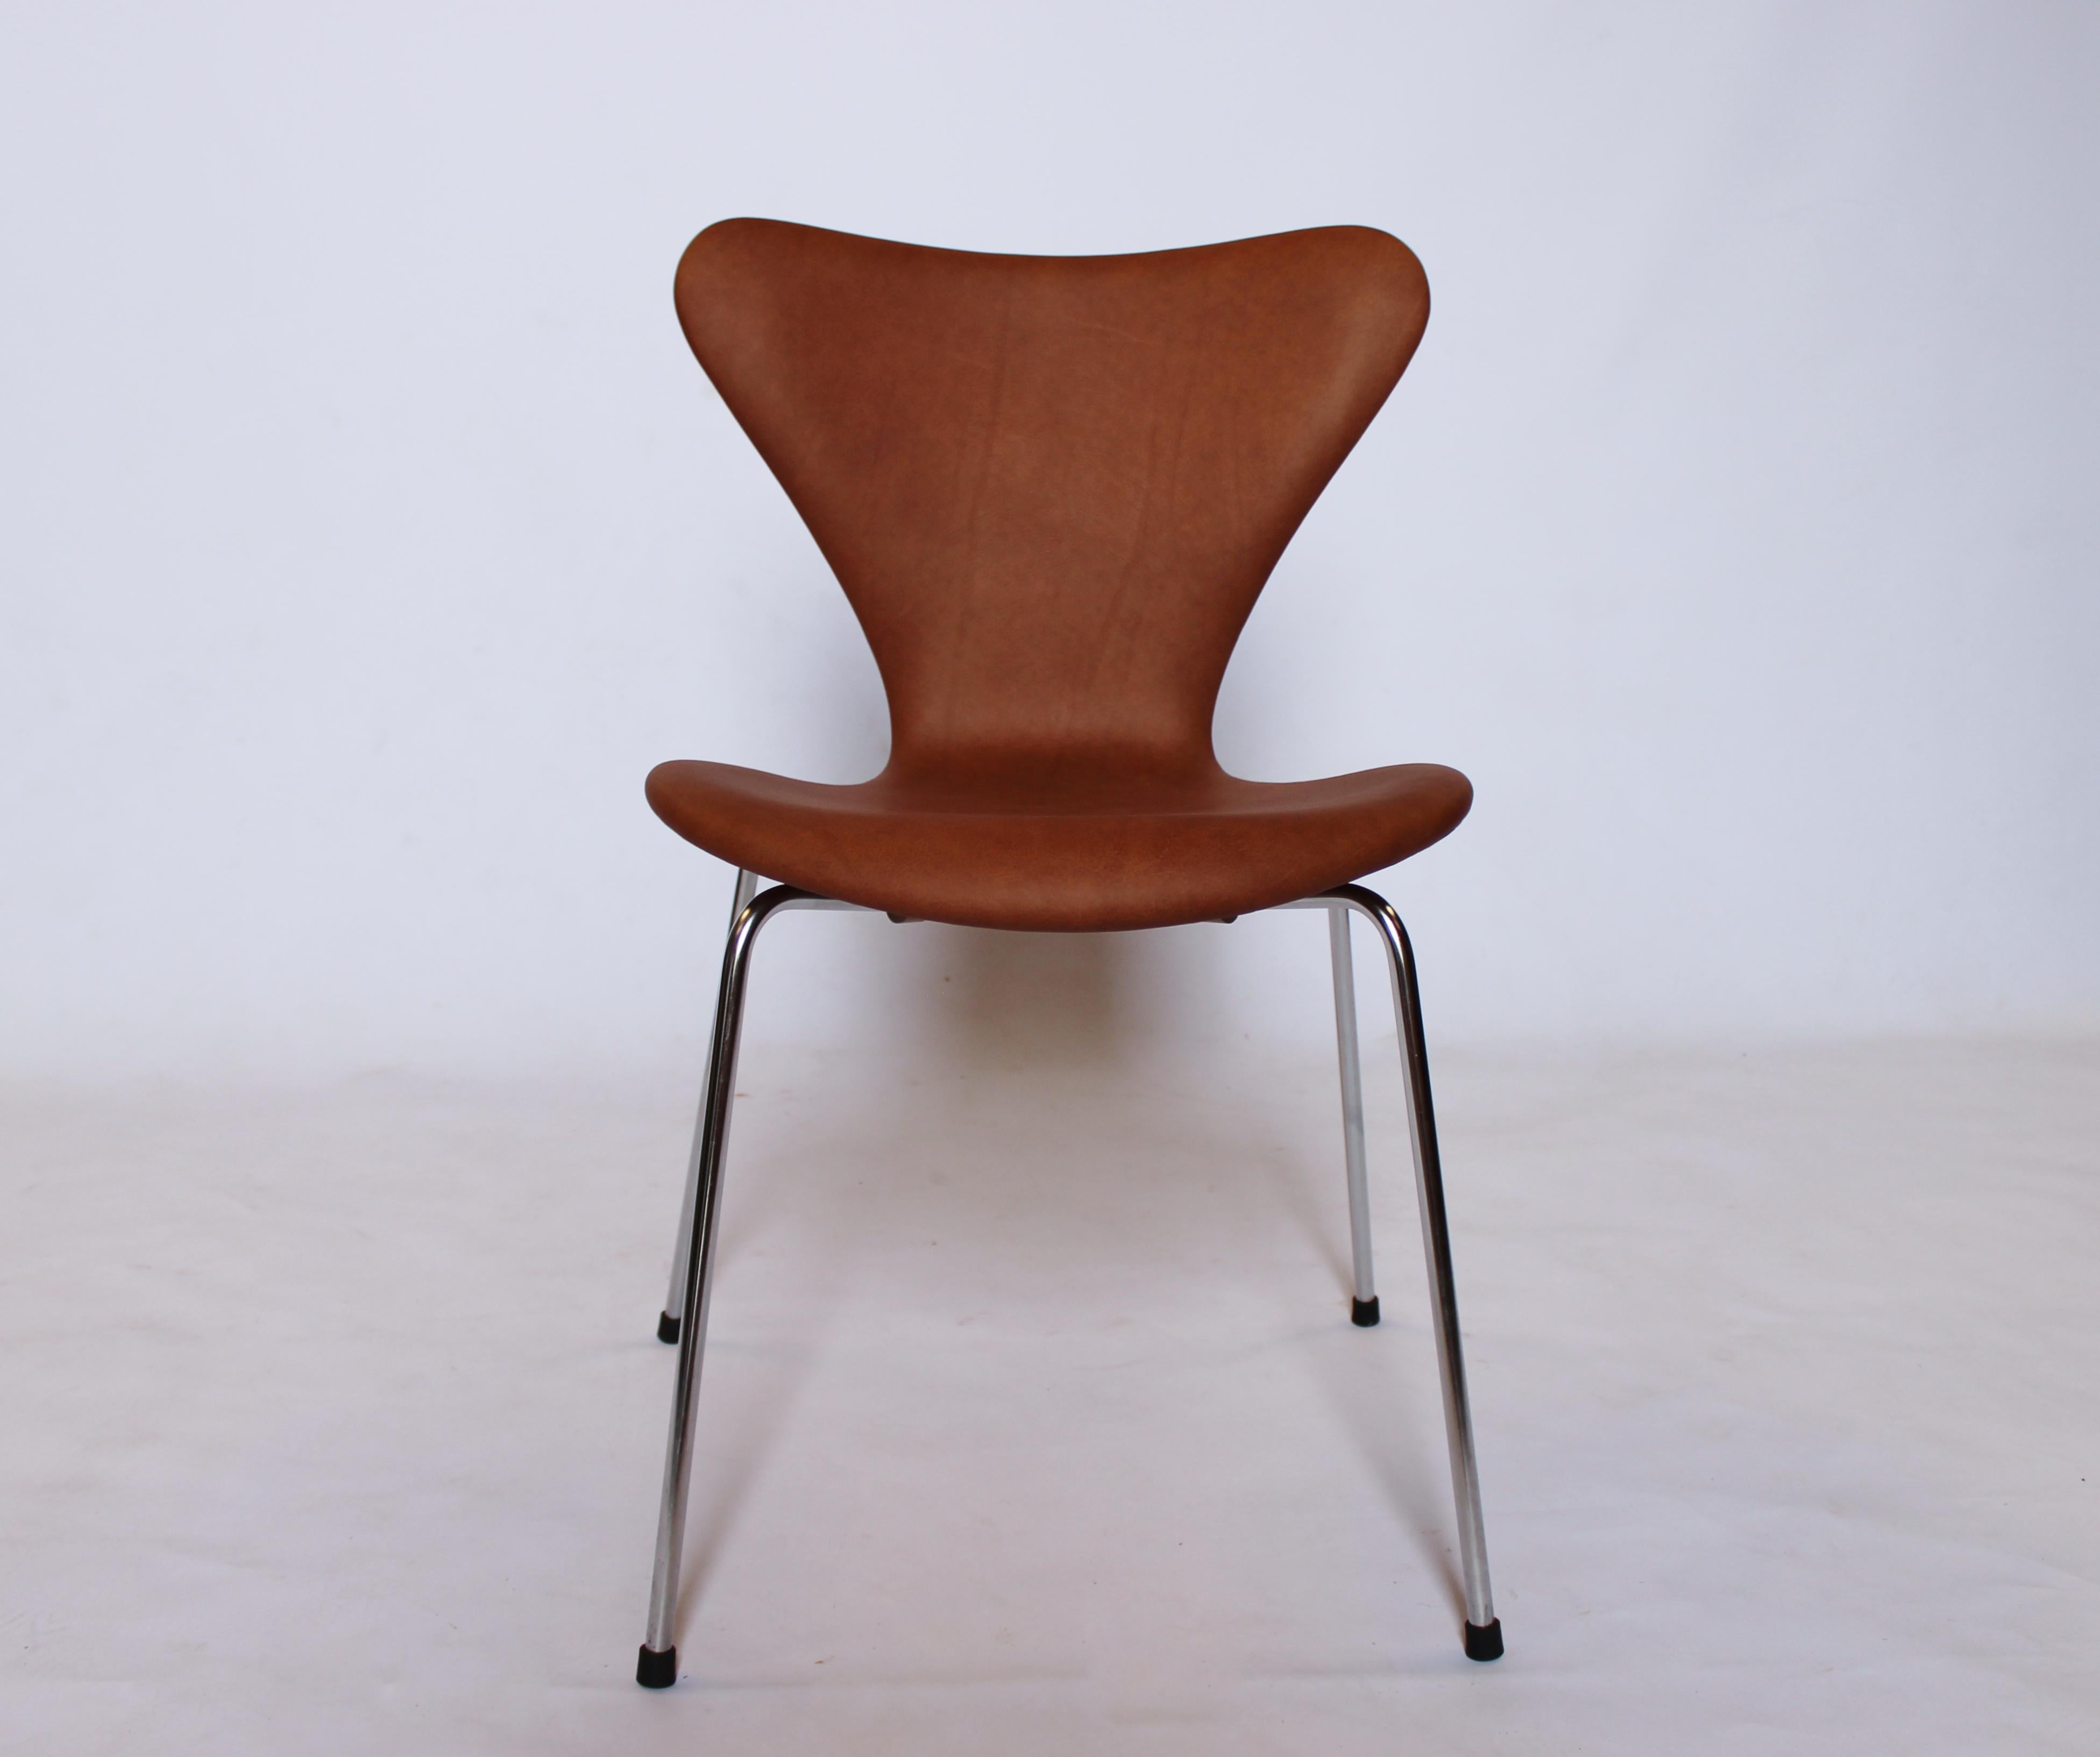 A set of 8 seven chairs, model 3107, designed by Arne Jacobsen and manufactured by Fritz Hansen in 1967. The chairs are newly upholstered in cognac patinated leather and are in great vintage condition.